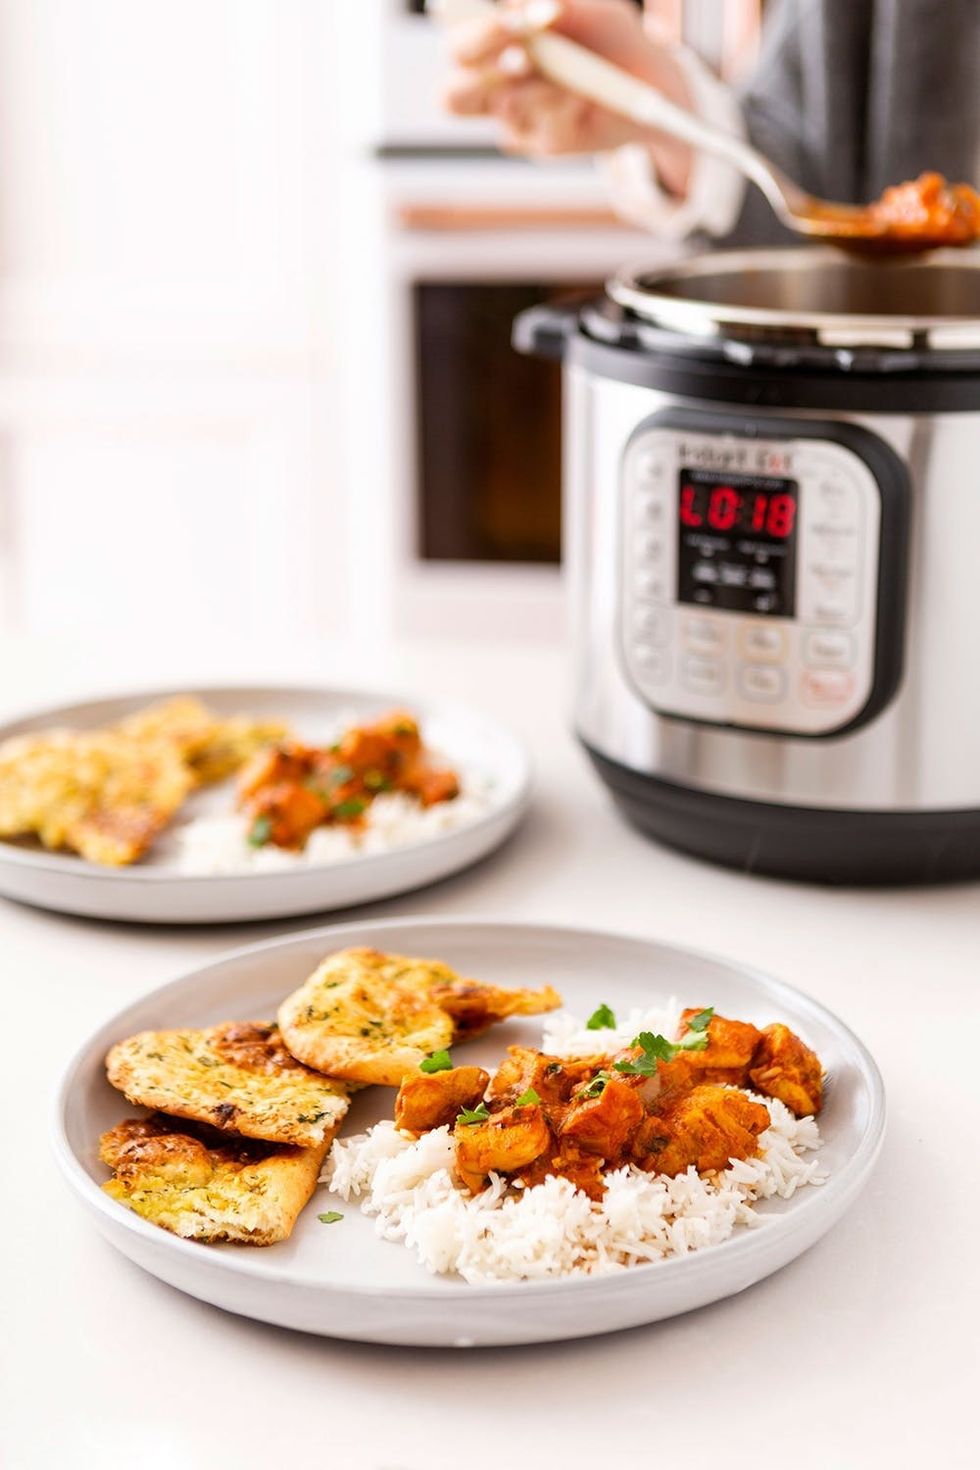 Power Quick Pot - Easy and Delicious Meals in Less Time - Powered